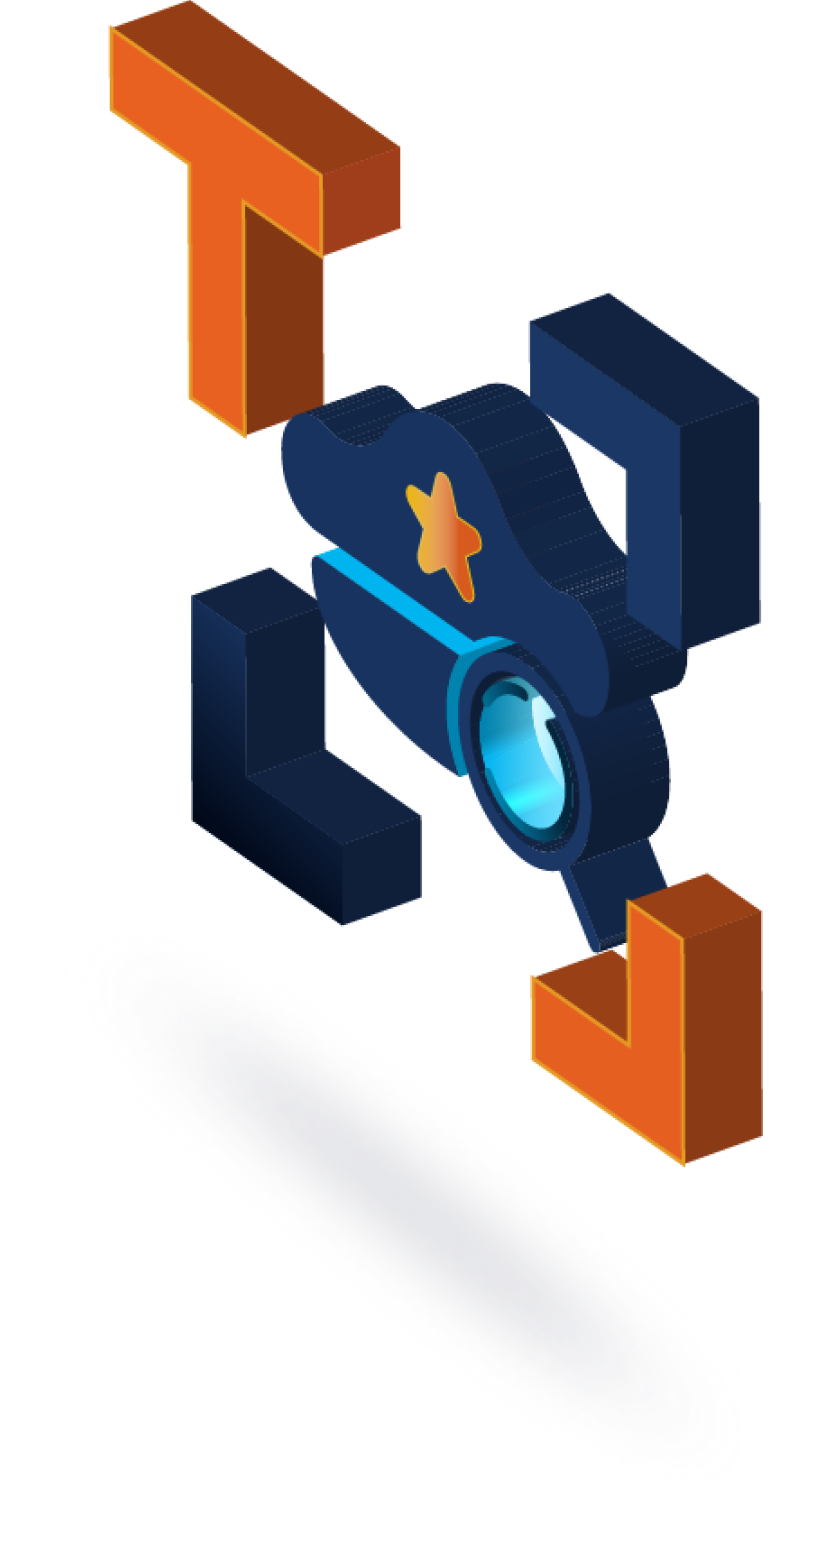 A blue and orange icon with a star in the middle.